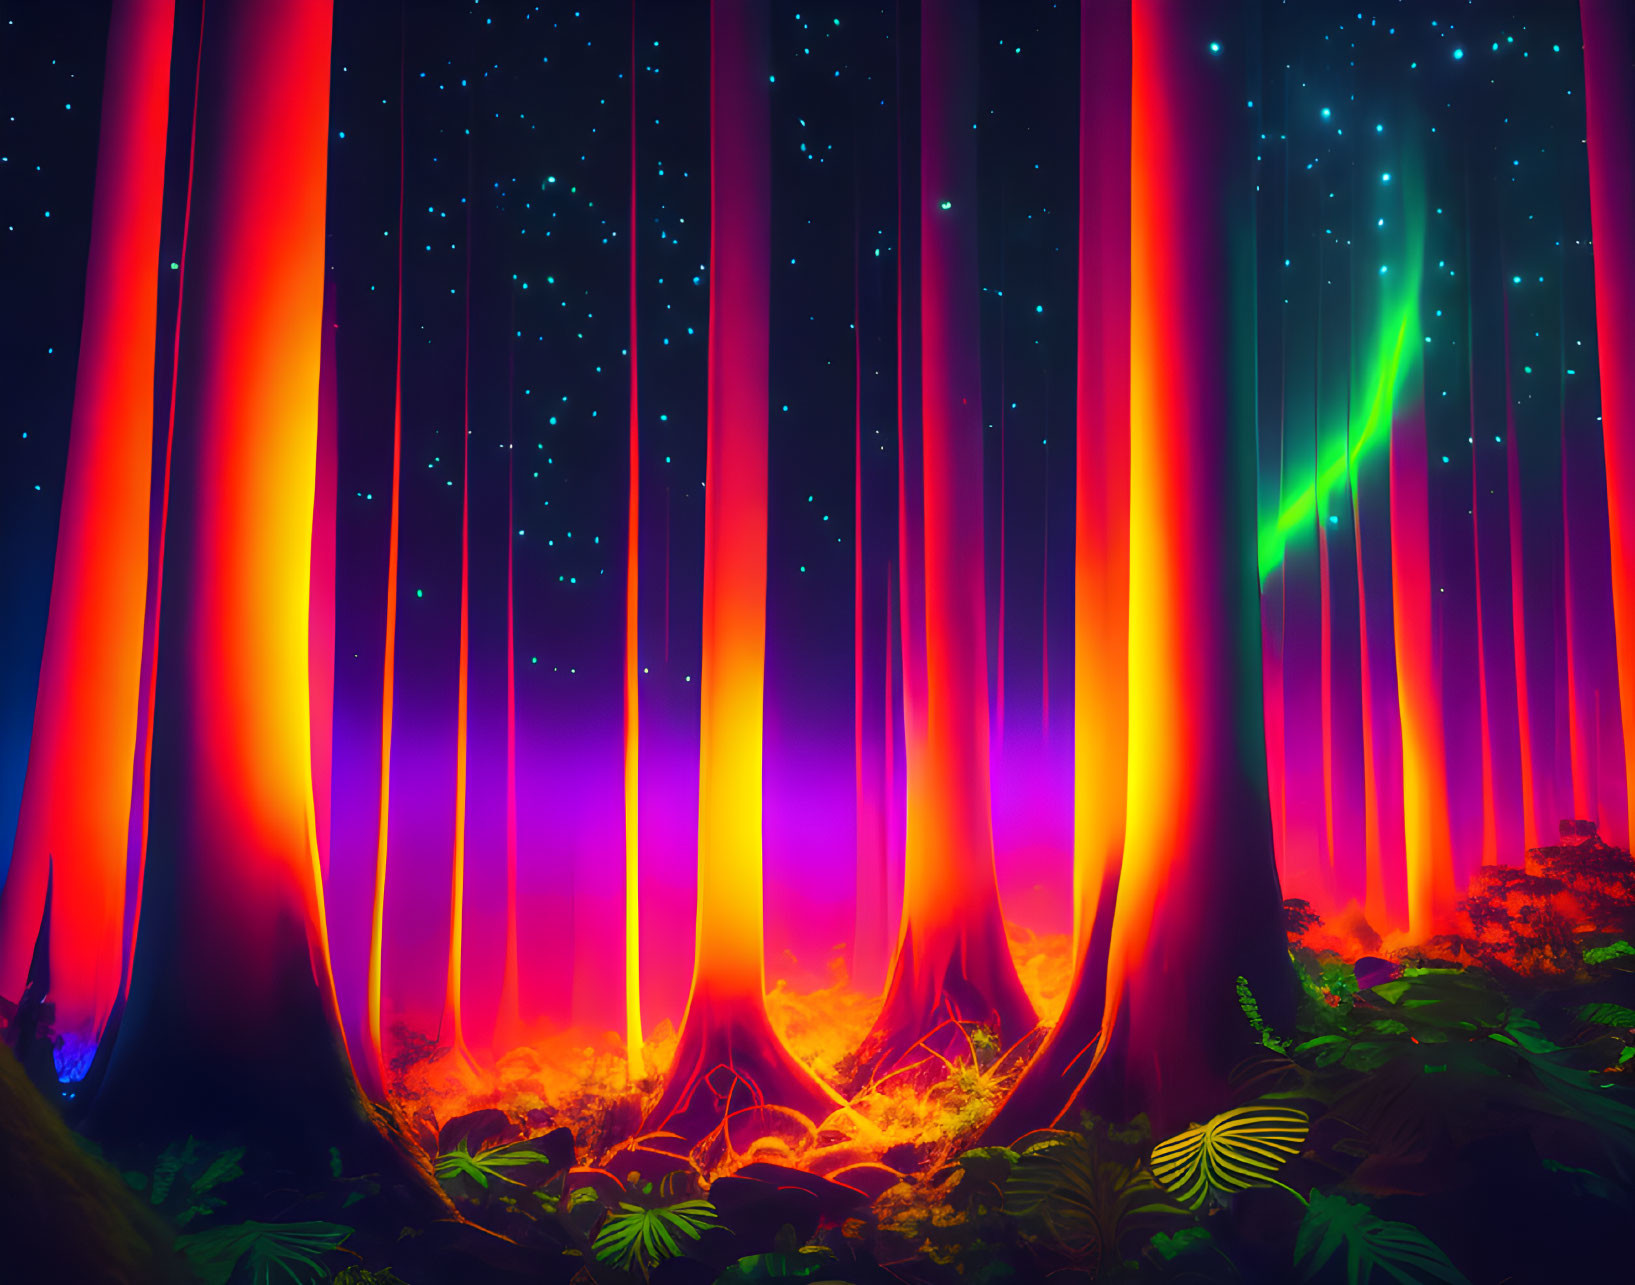 Vibrant digital art: Glowing lava-like trees in starry sky with green aurora